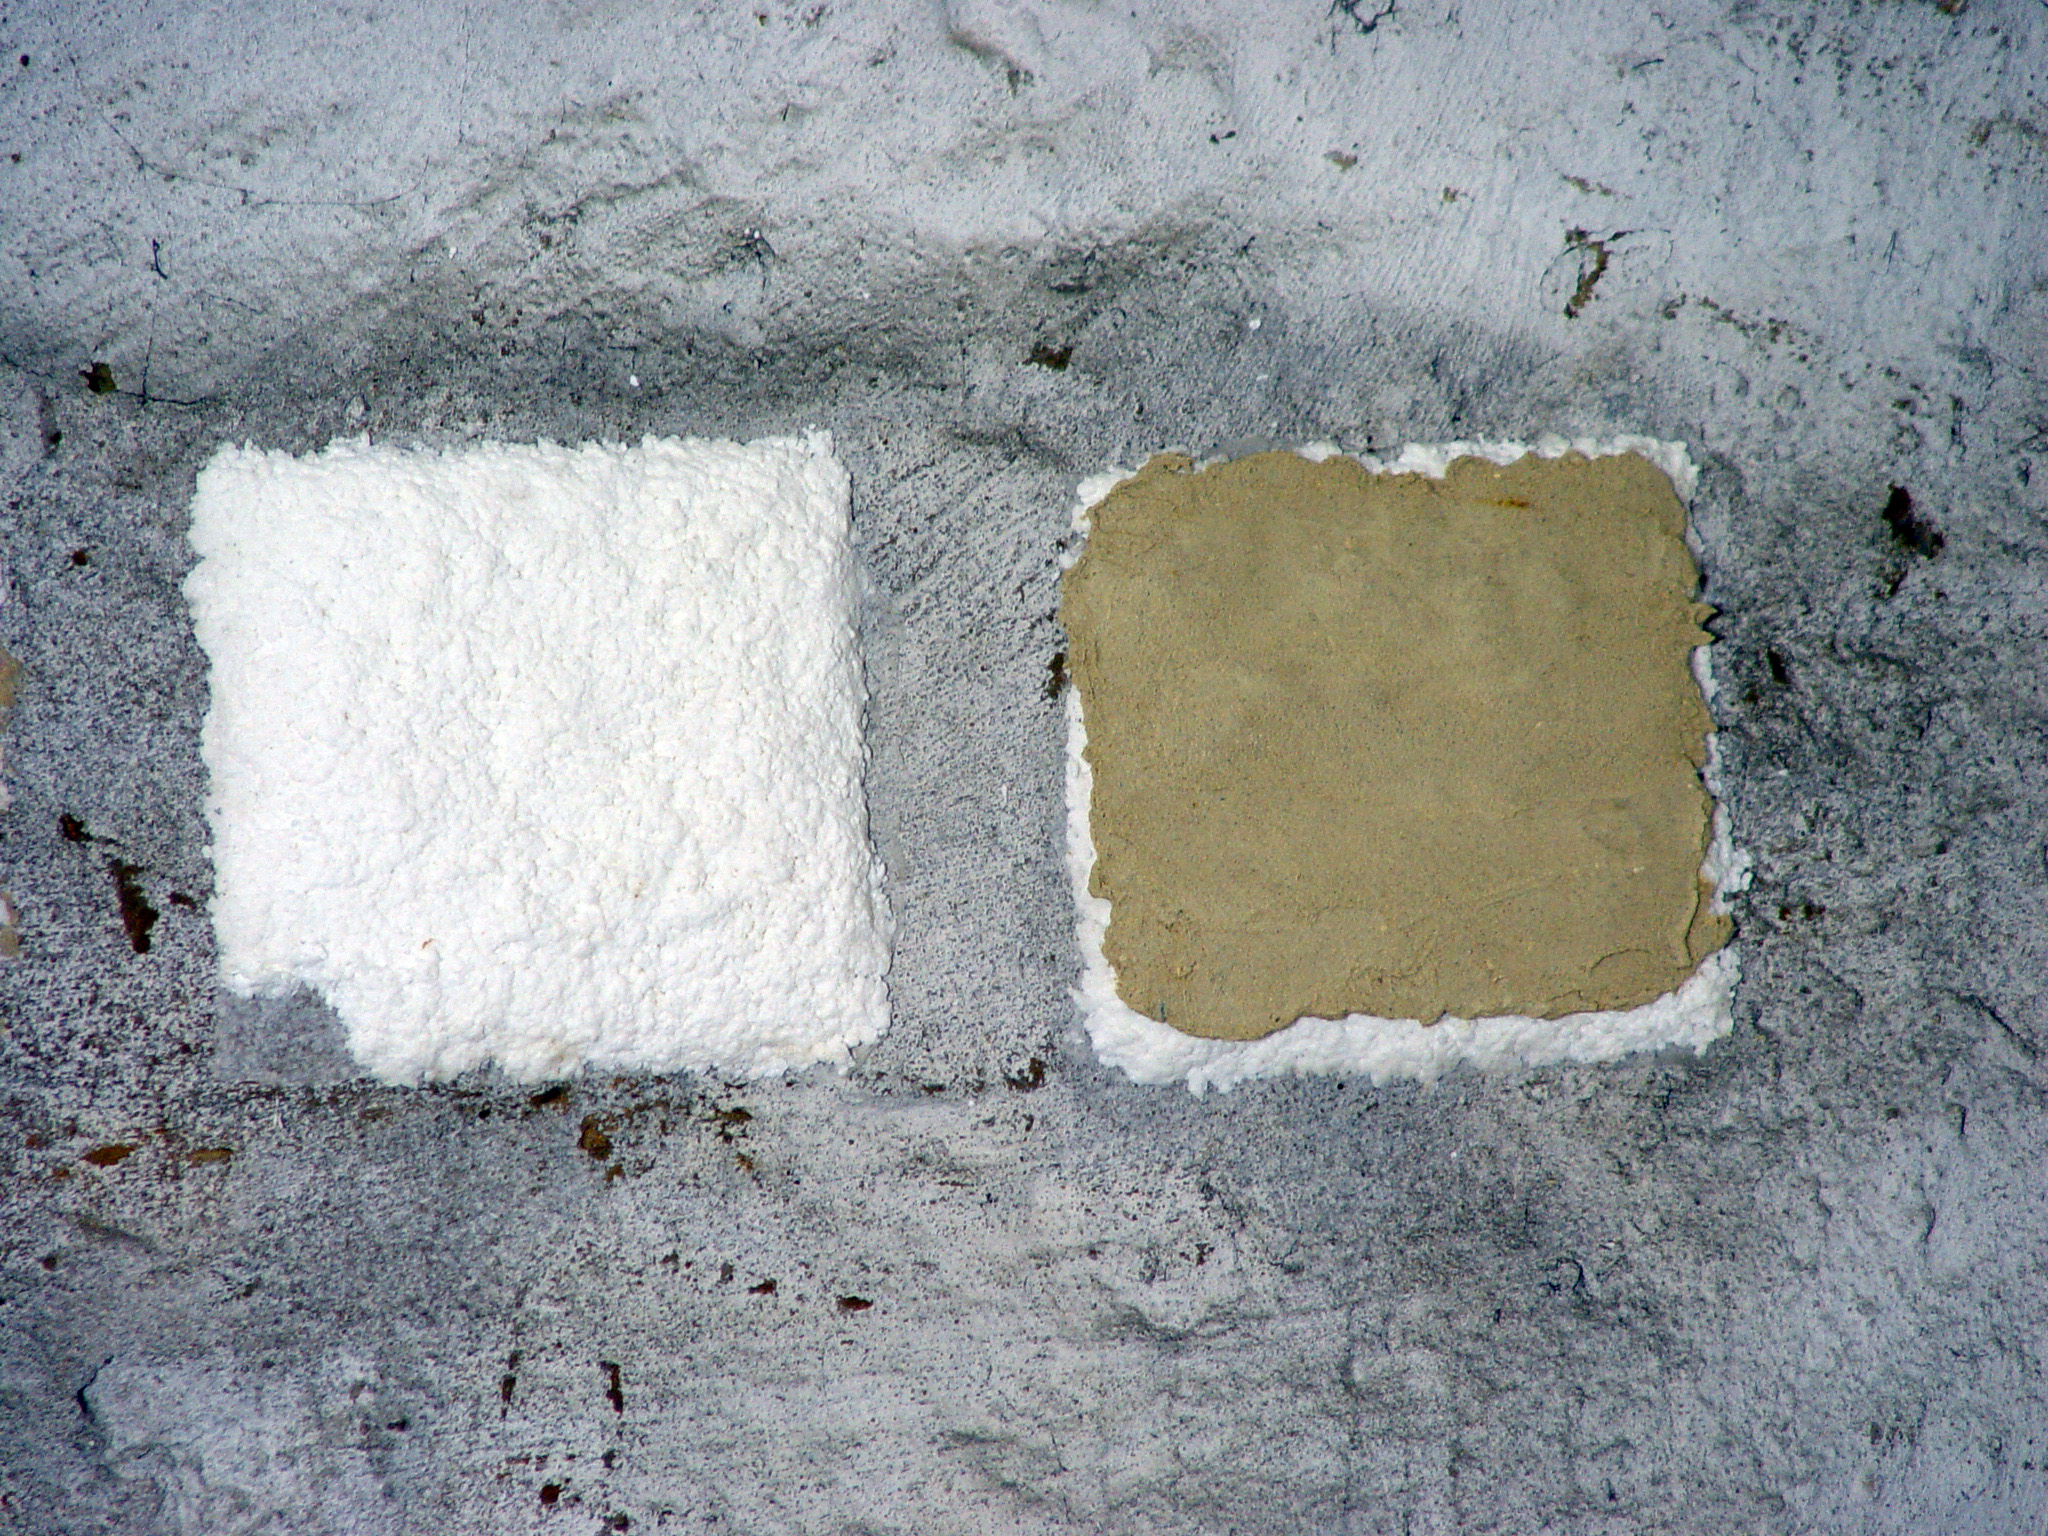 figure 1: Compresses with and without plaster covering